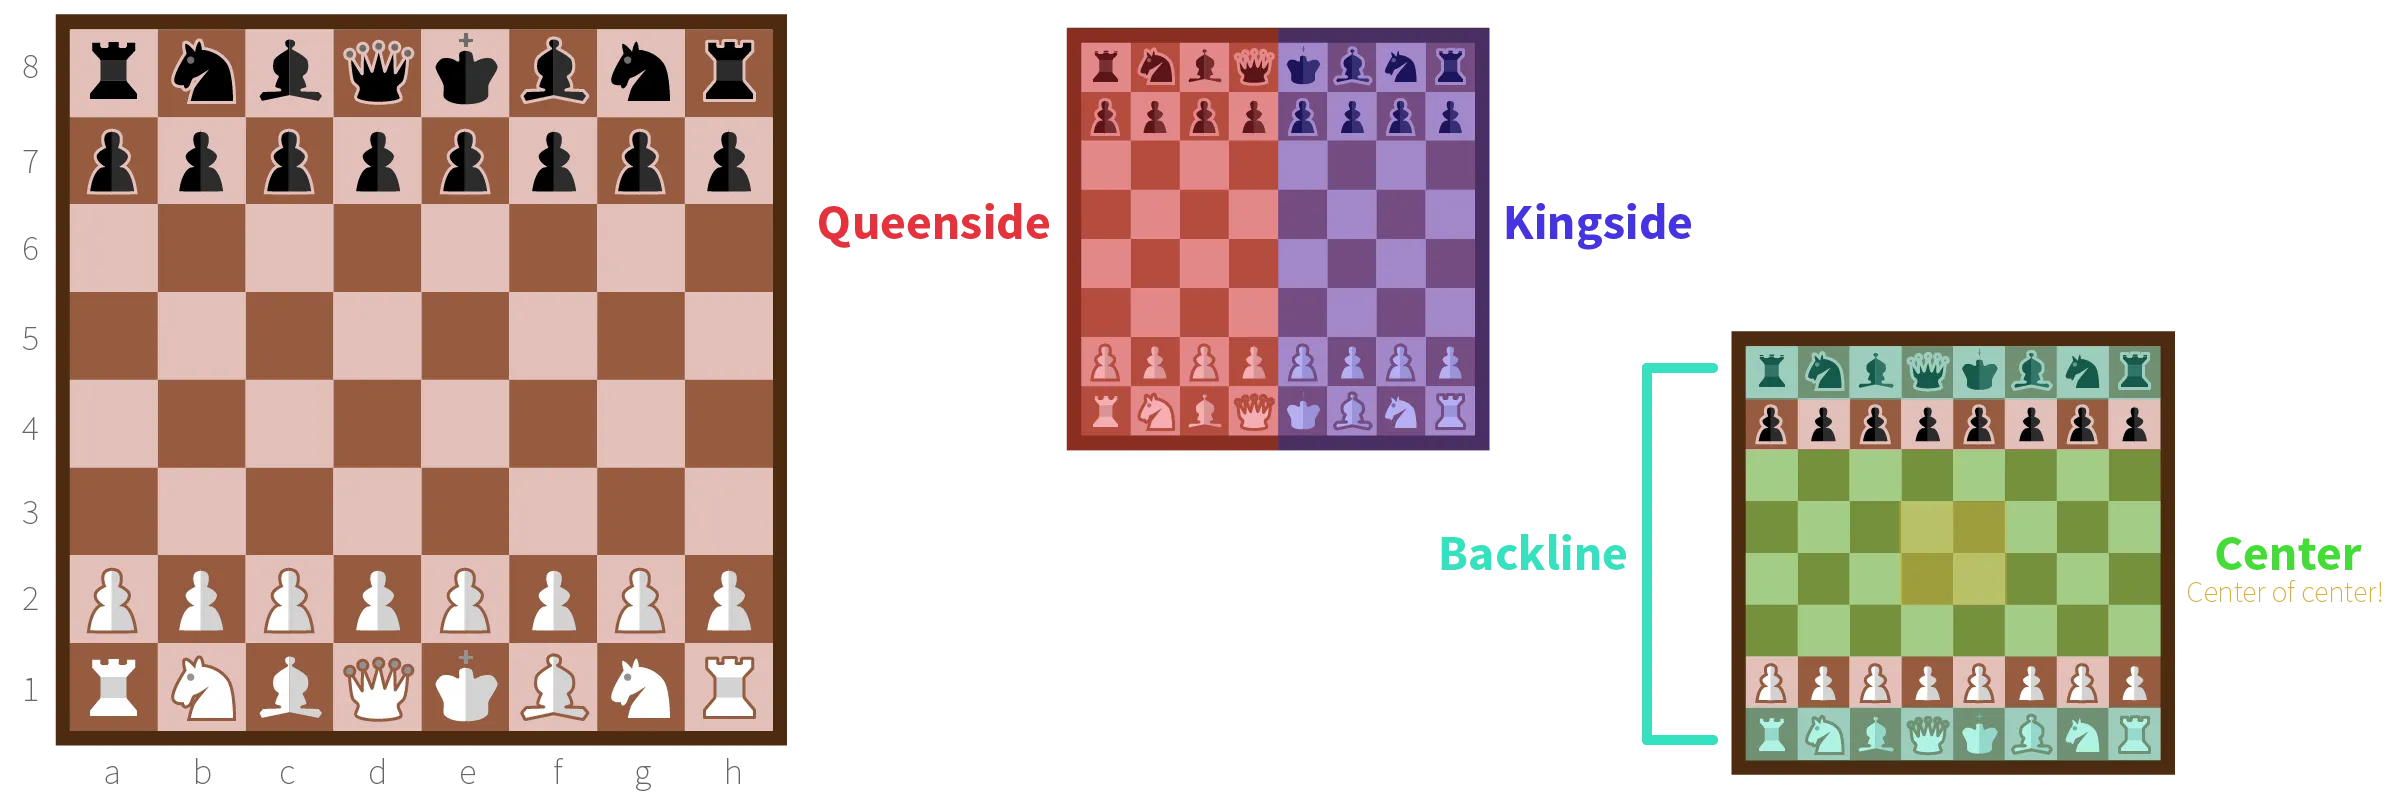 Chess board: definitions and overview